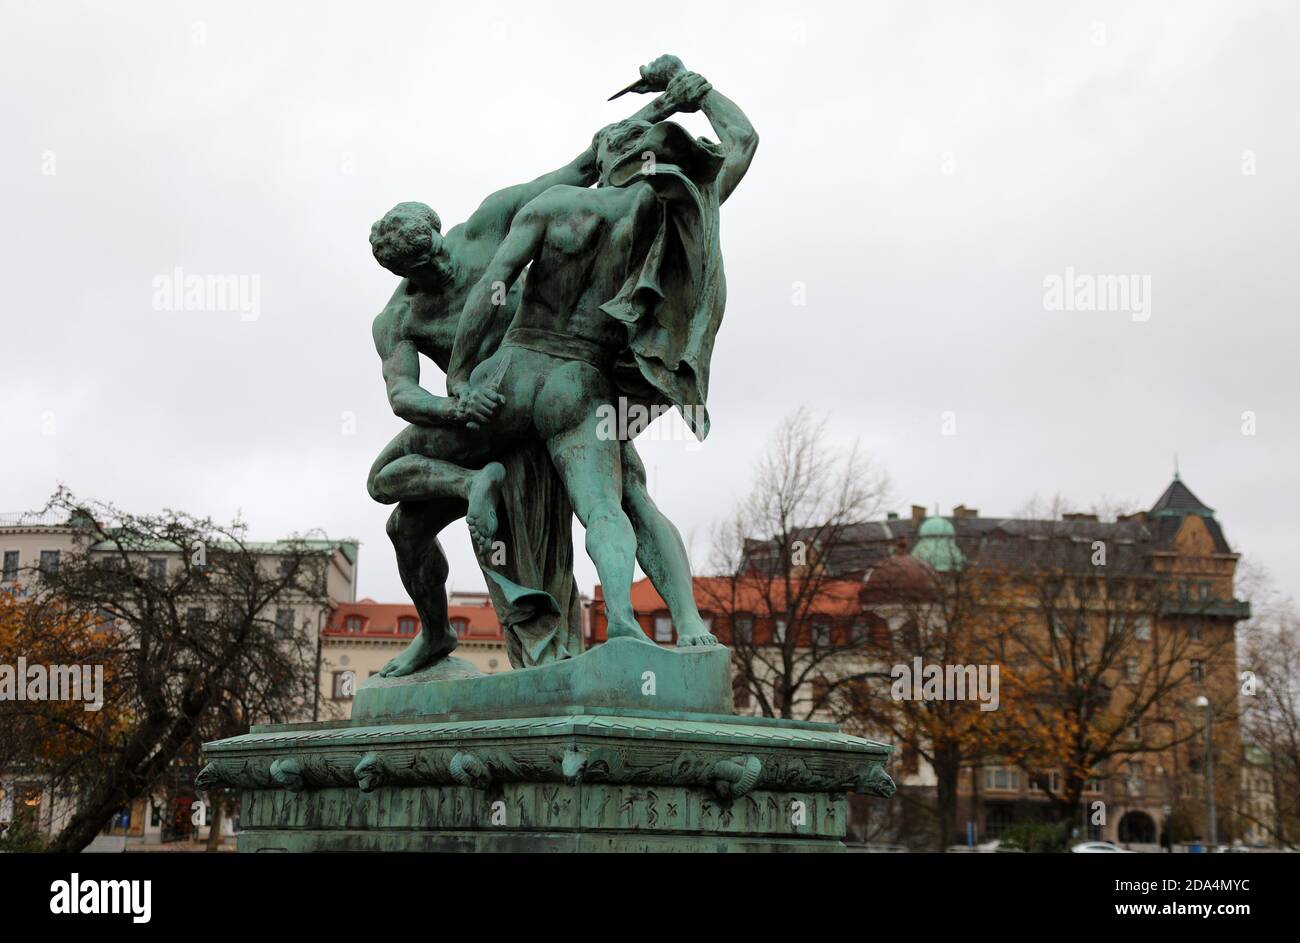 The Knife Wrestlers sculpture by Johan Peter Molin at Gothenburg in Sweden Stock Photo